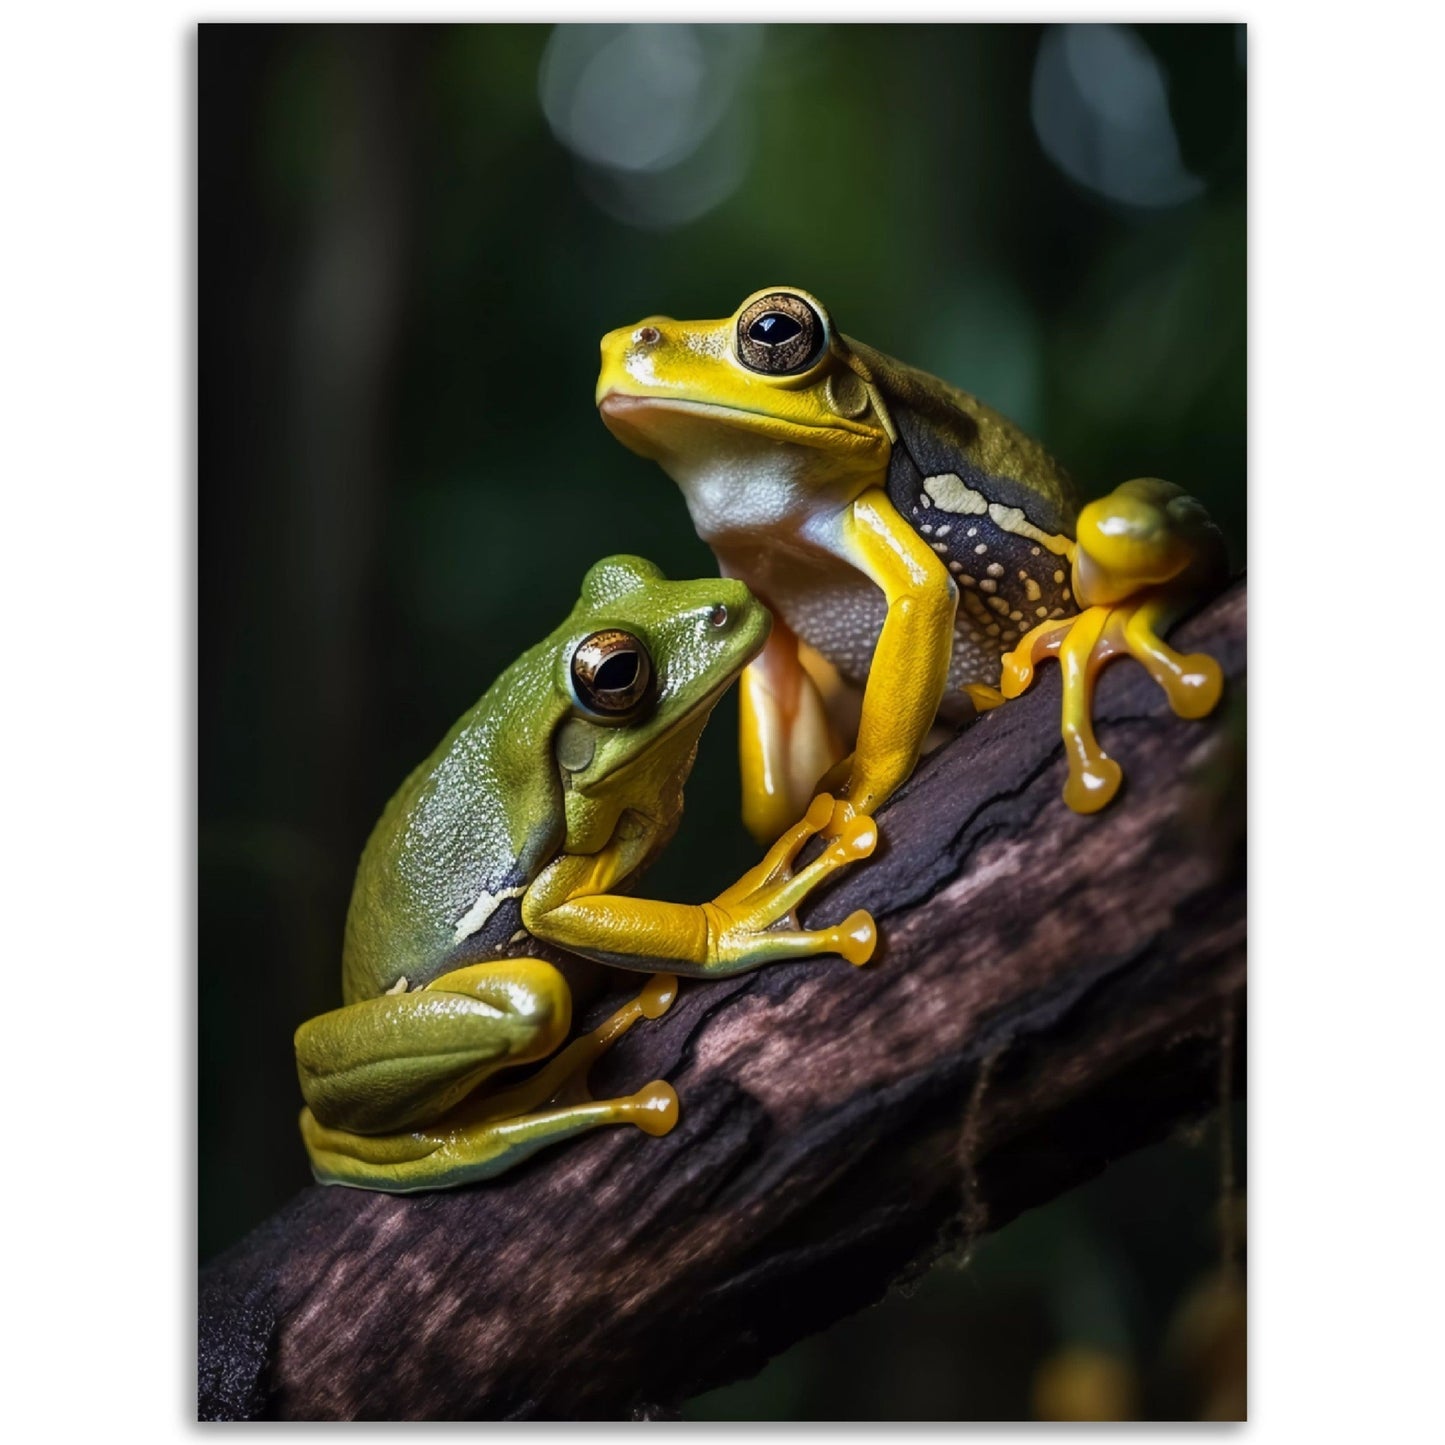 Two frogs sitting on a branch, depicted in Tropical Friends posters.